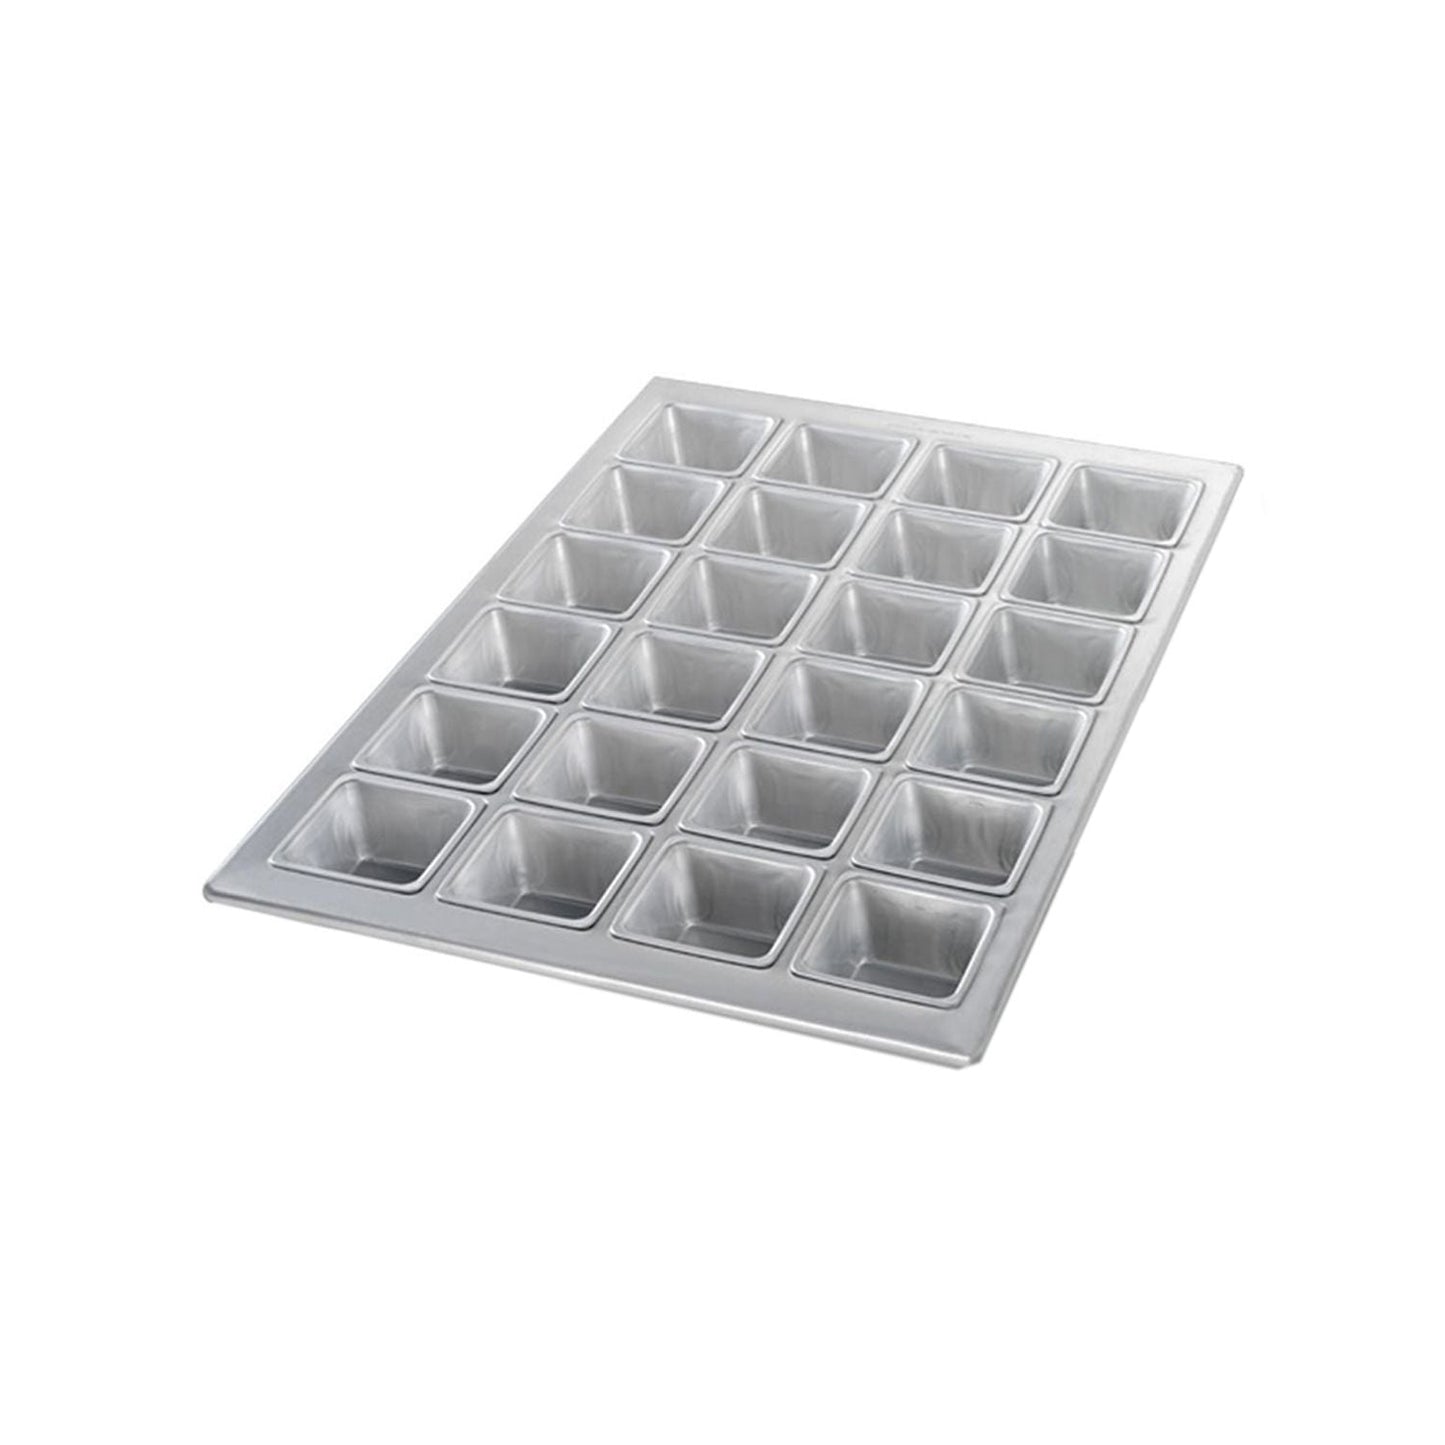 24 Cups Square Muffin Tray